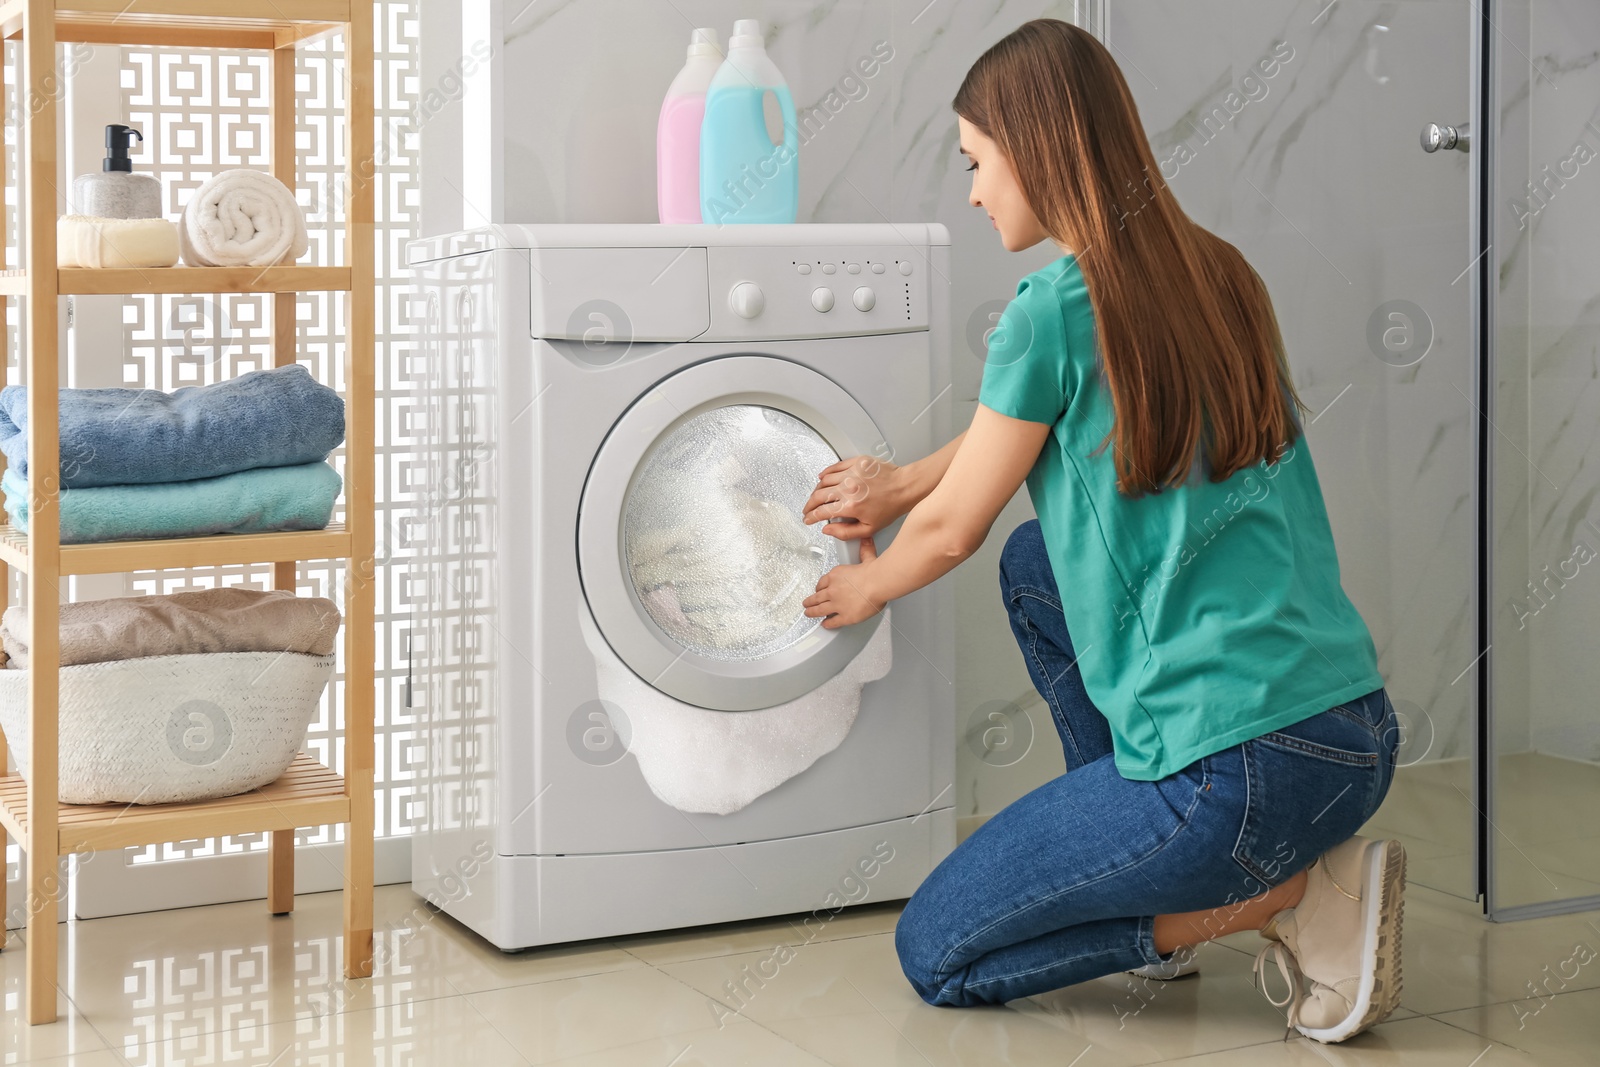 Image of Woman near broken washing machine in room. Foam coming out from drum during laundering